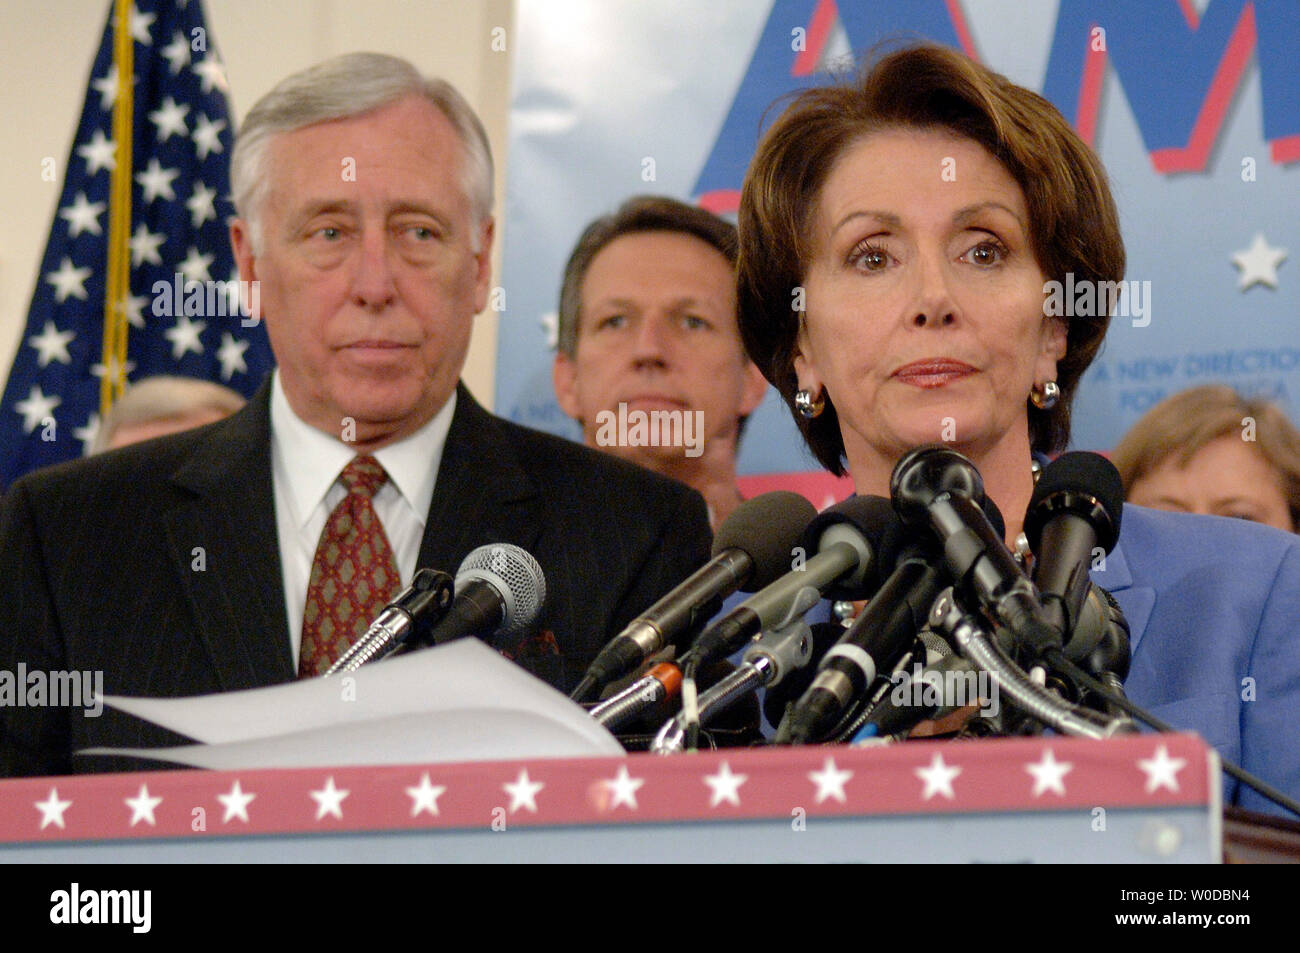 Speaker of the House Nancy Pelosi (D-CA) (R) speaks along side House Majority Leader Steny Hoyer (D-MD) at a press conference marking the first 100 legislative hours of the new Congress, in Washington on January 18, 2007. (UPI Photo/Kevin Dietsch) Stock Photo